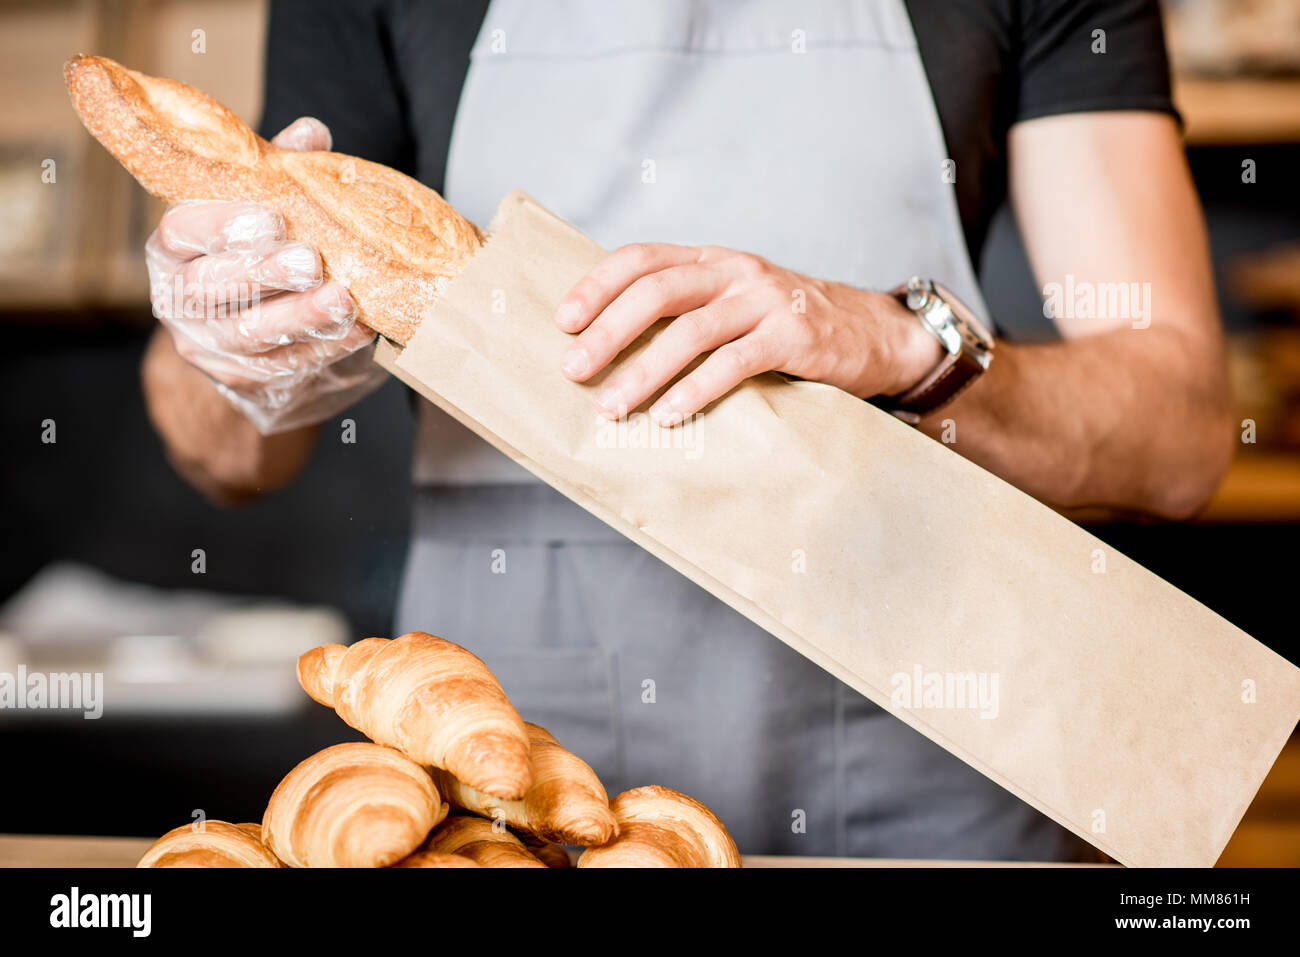 Packing bread into the paper bag Stock Photo